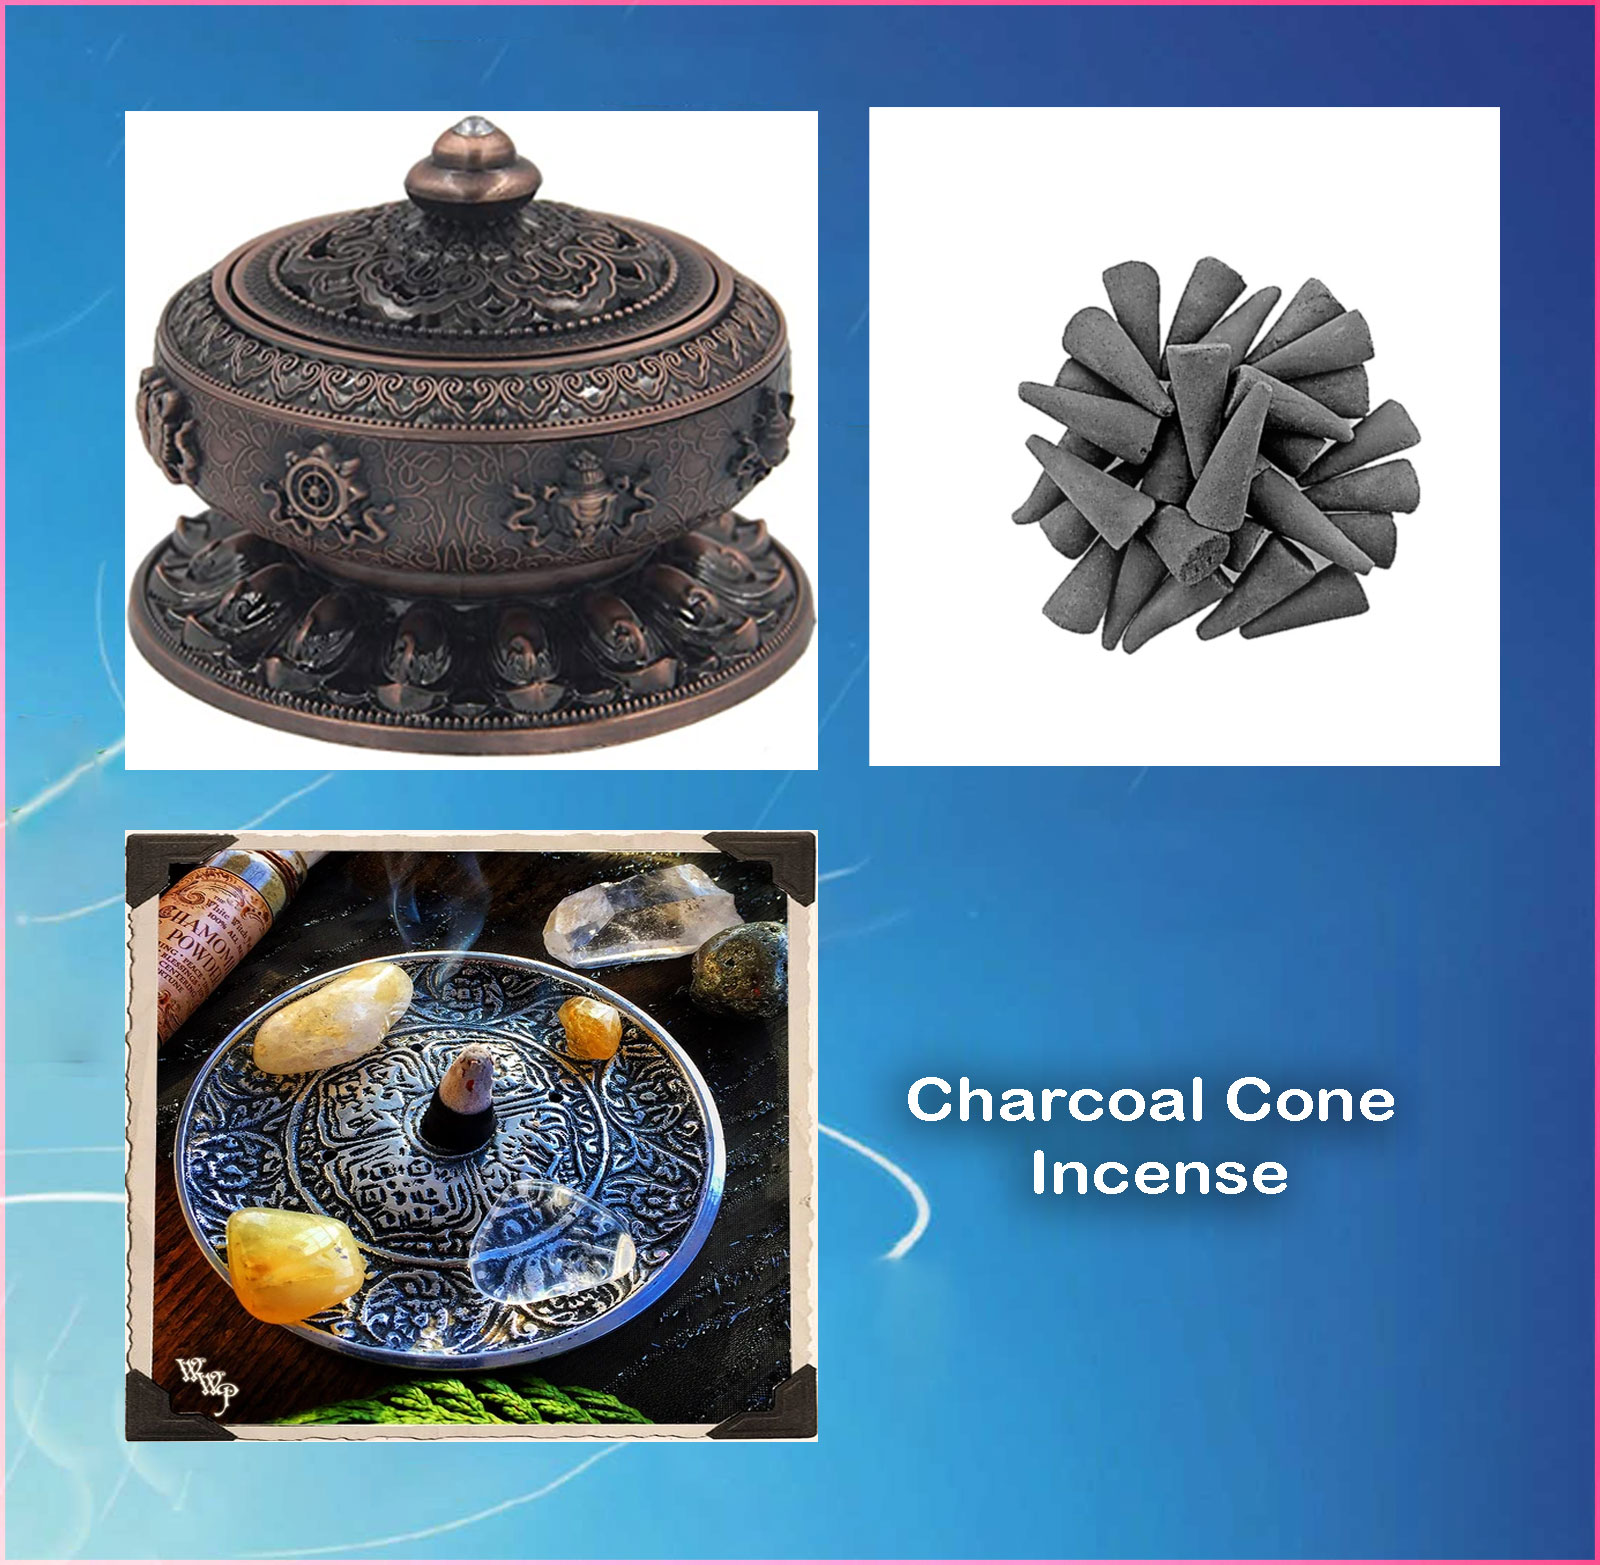 Charcoal Cone Incense